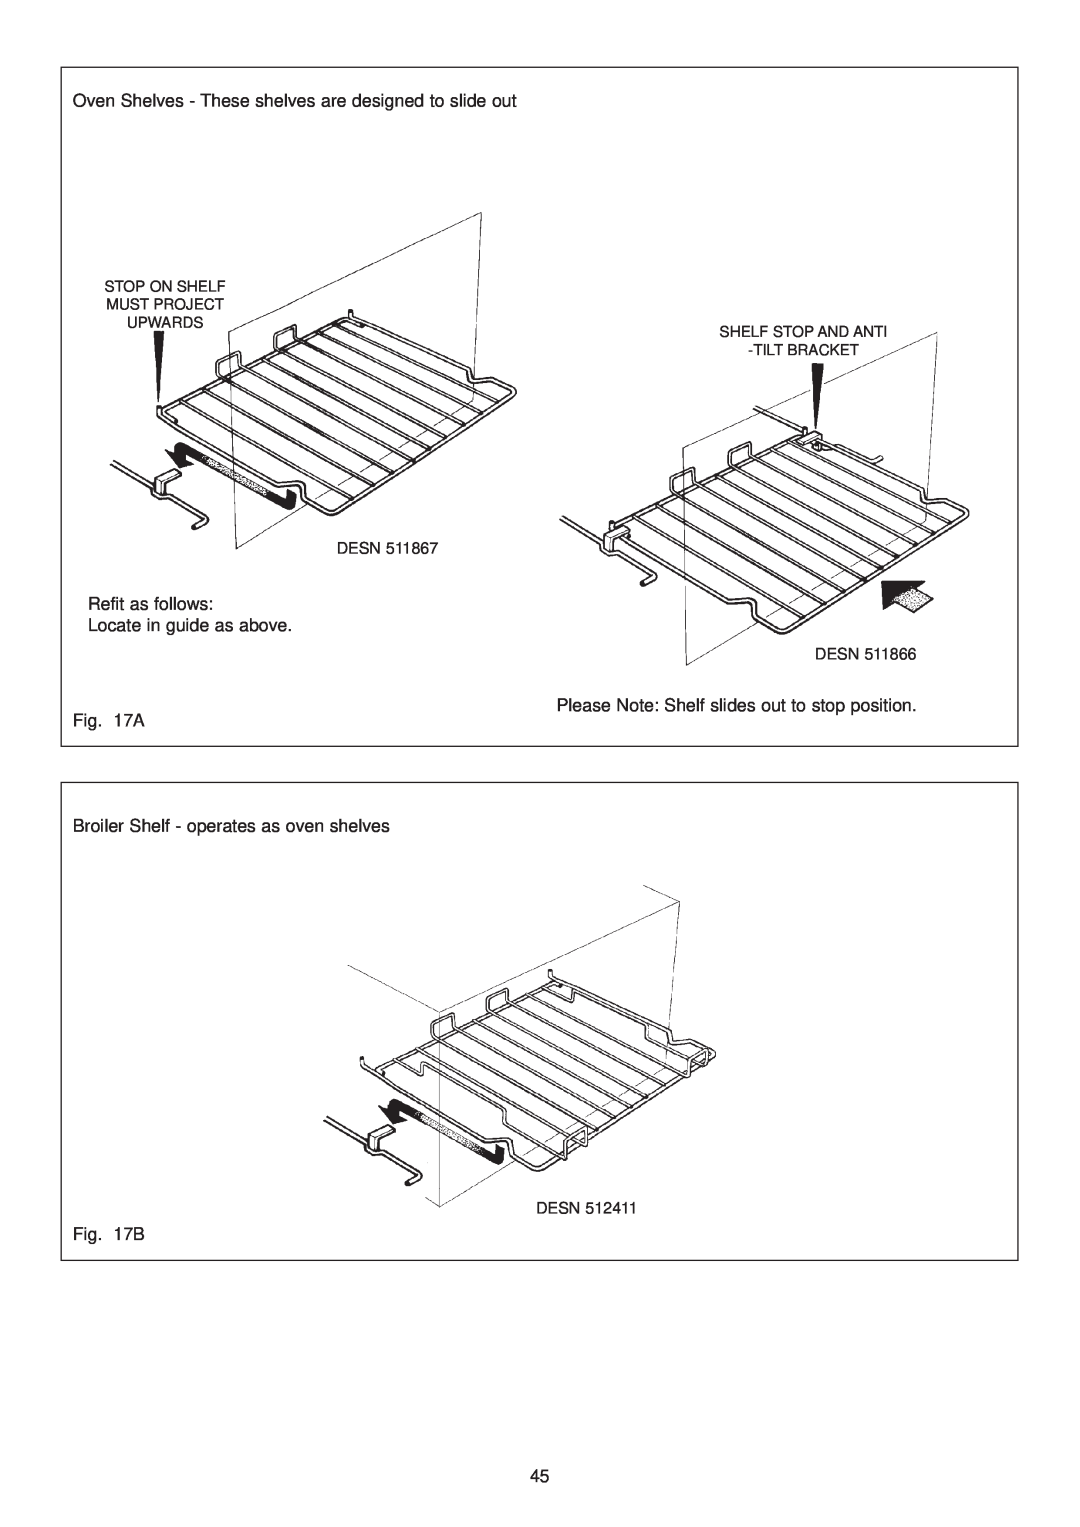 Aga Ranges DC6 (FFD) Oven Shelves - These shelves are designed to slide out, Refit as follows Locate in guide as above, A 